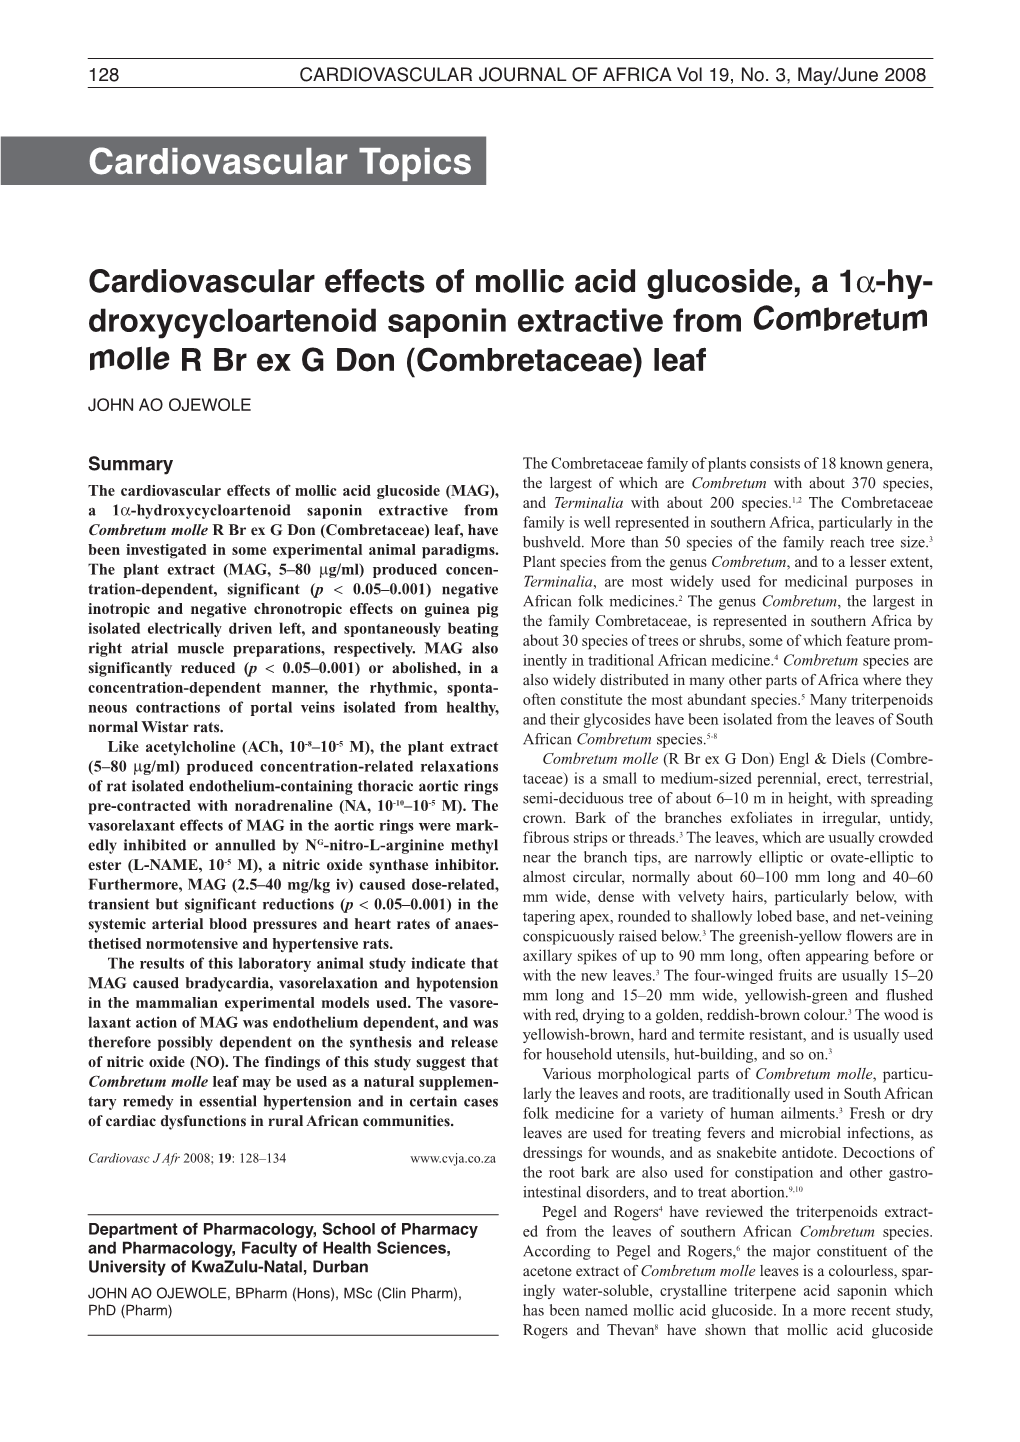 Cardiovascular Effects of Mollic Acid Glucoside, a 1Α-Hy-Droxycycloartenoid Saponin Extractive from Combretum Molle R Br Ex G Don (Combretaceae) Leaf